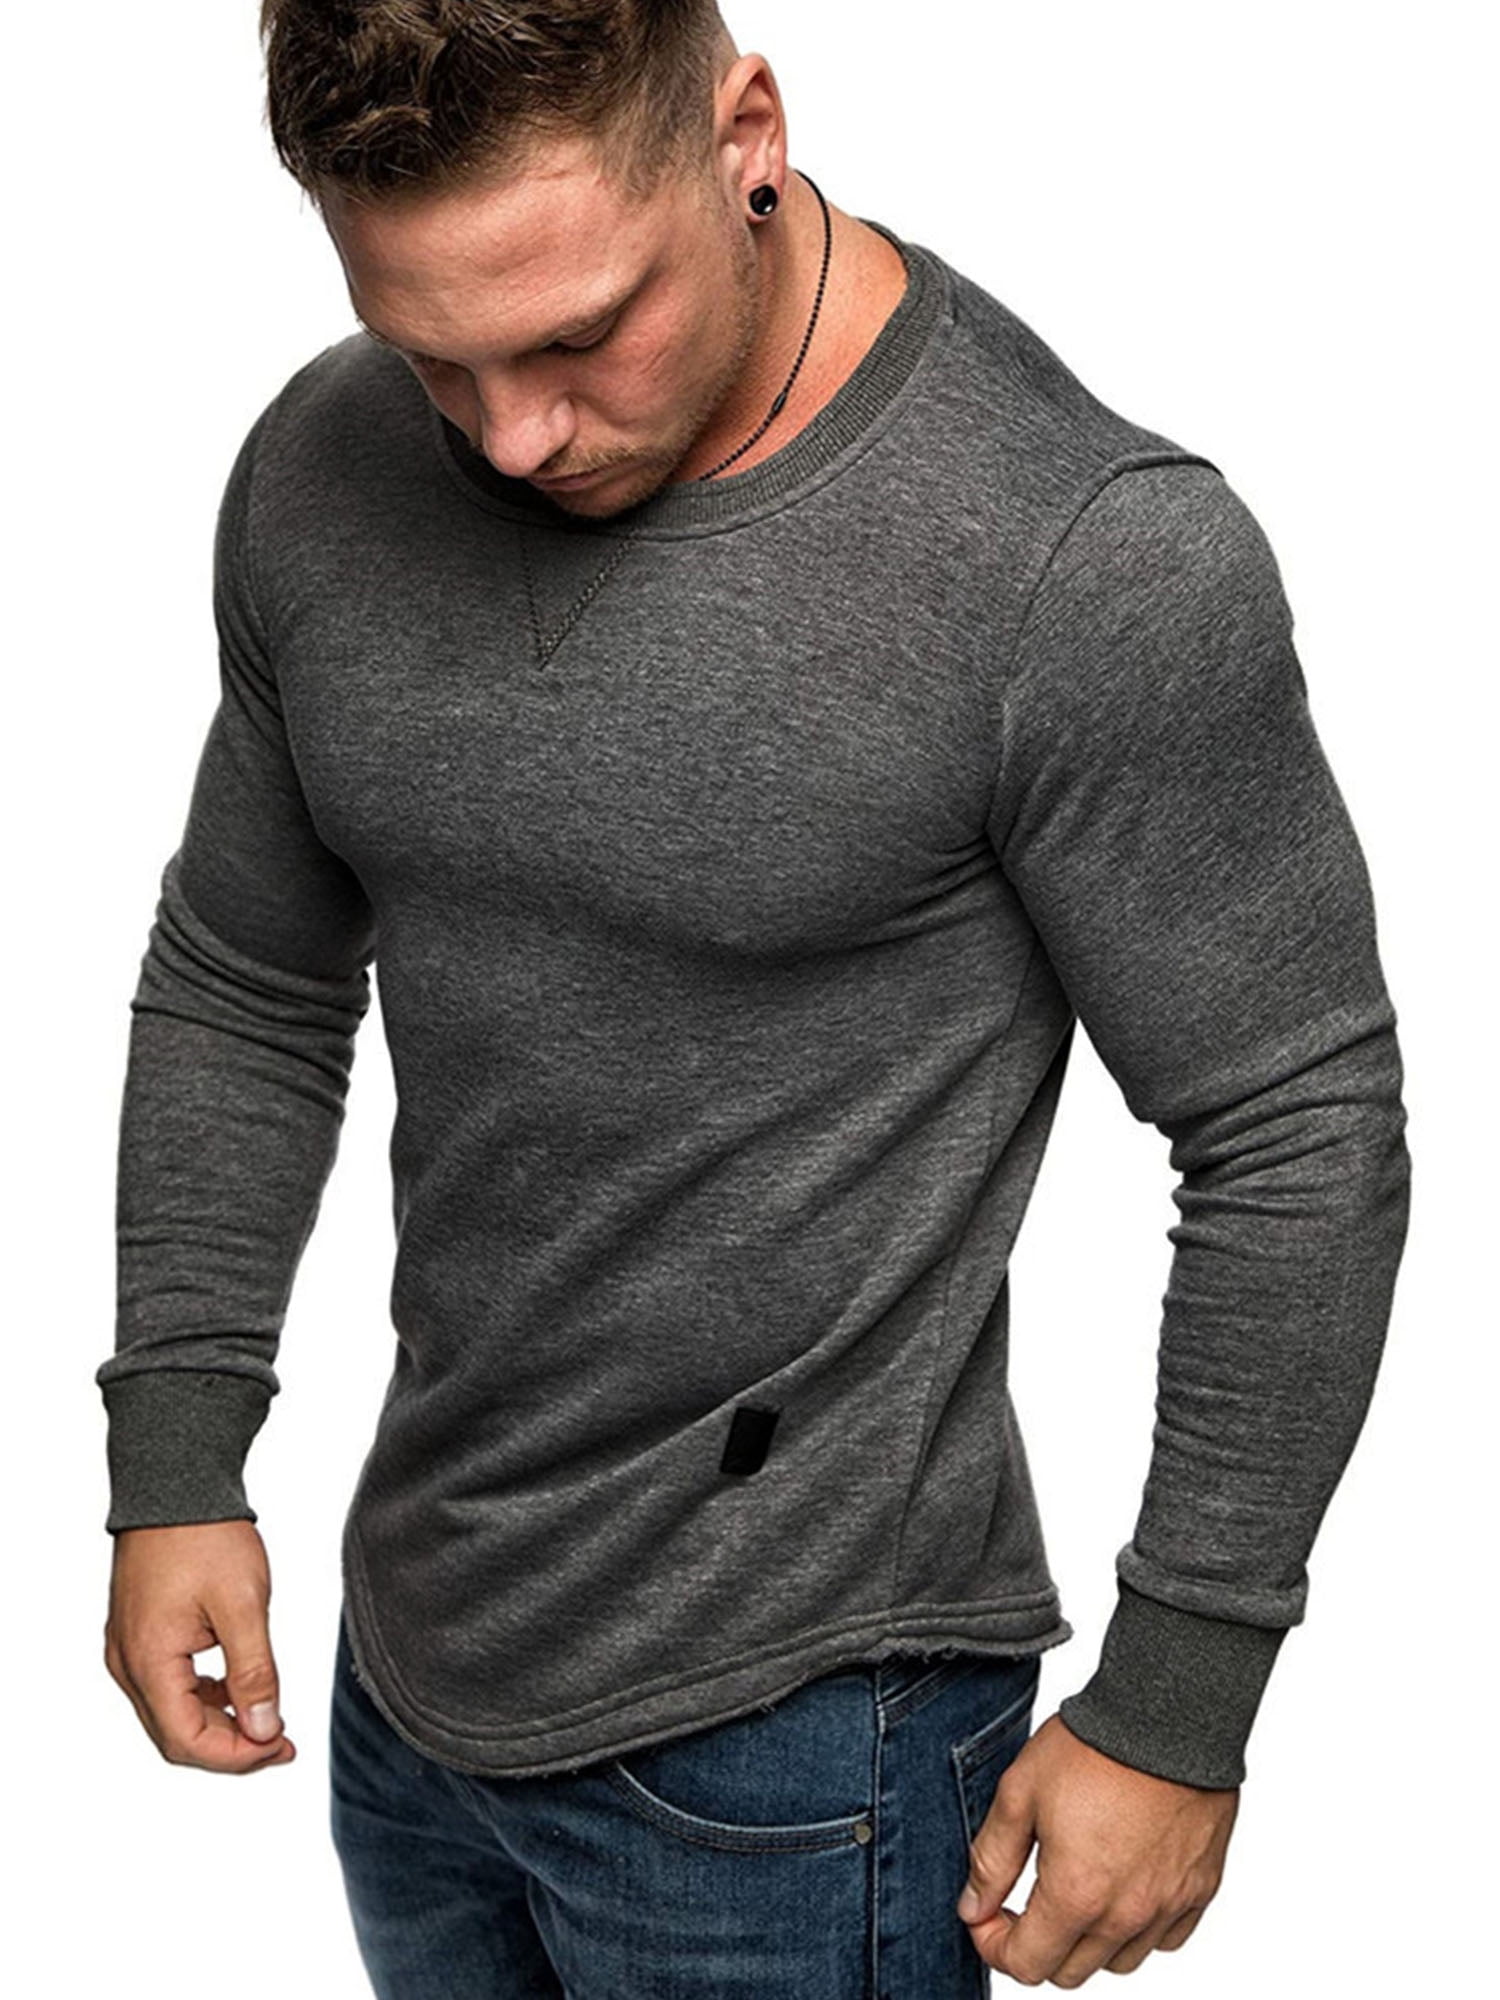 athletic fit tee shirts